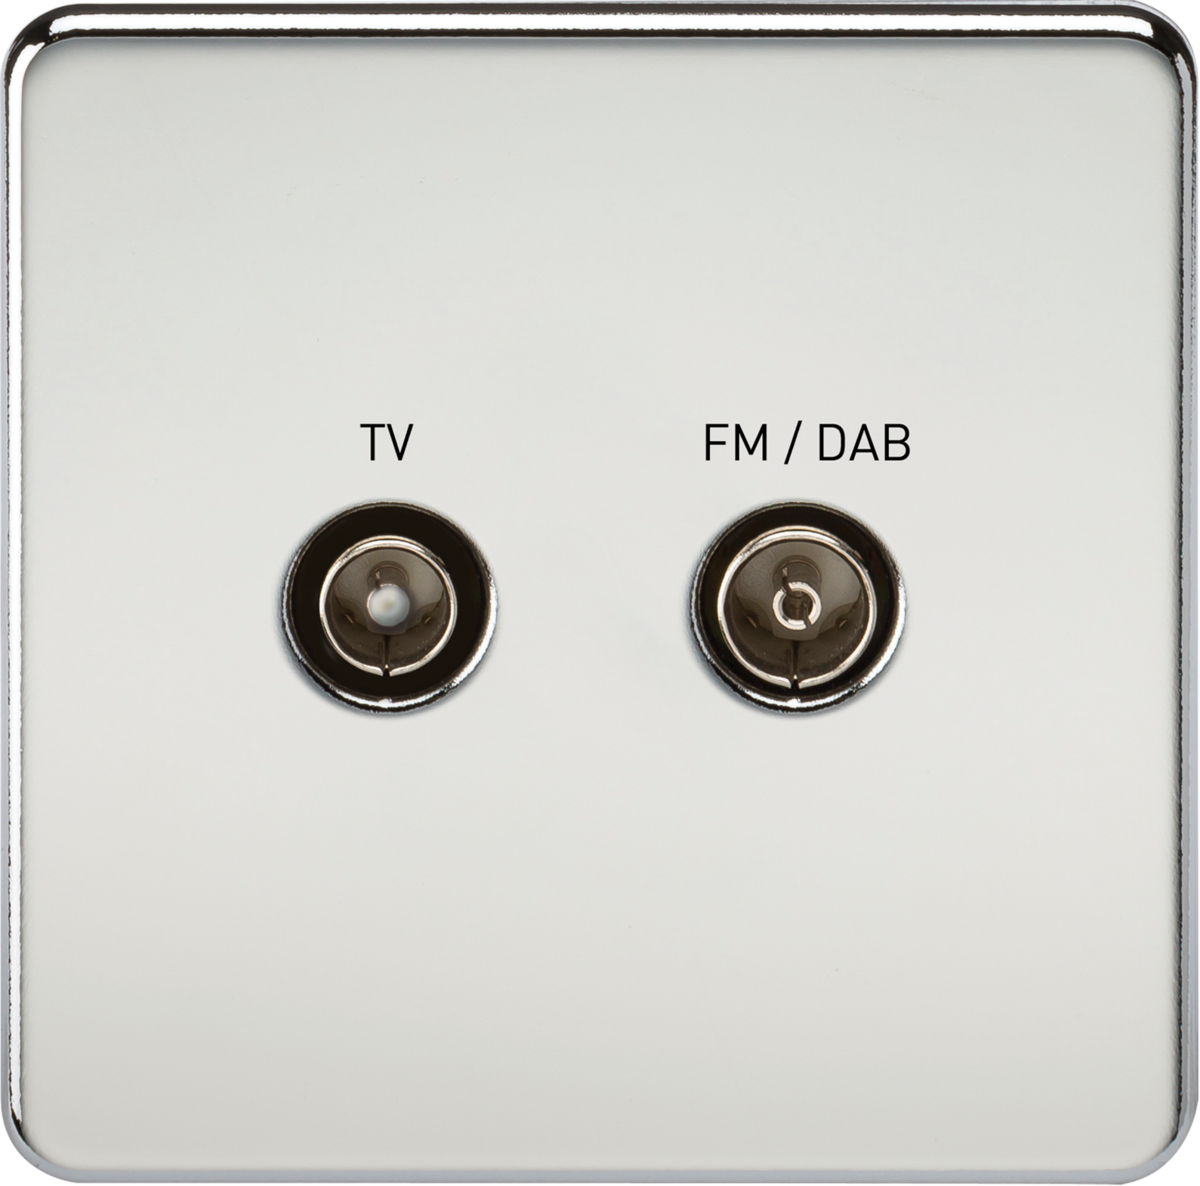 Screwless Screened Diplex Outlet (TV and FM DAB) - Polished Chrome